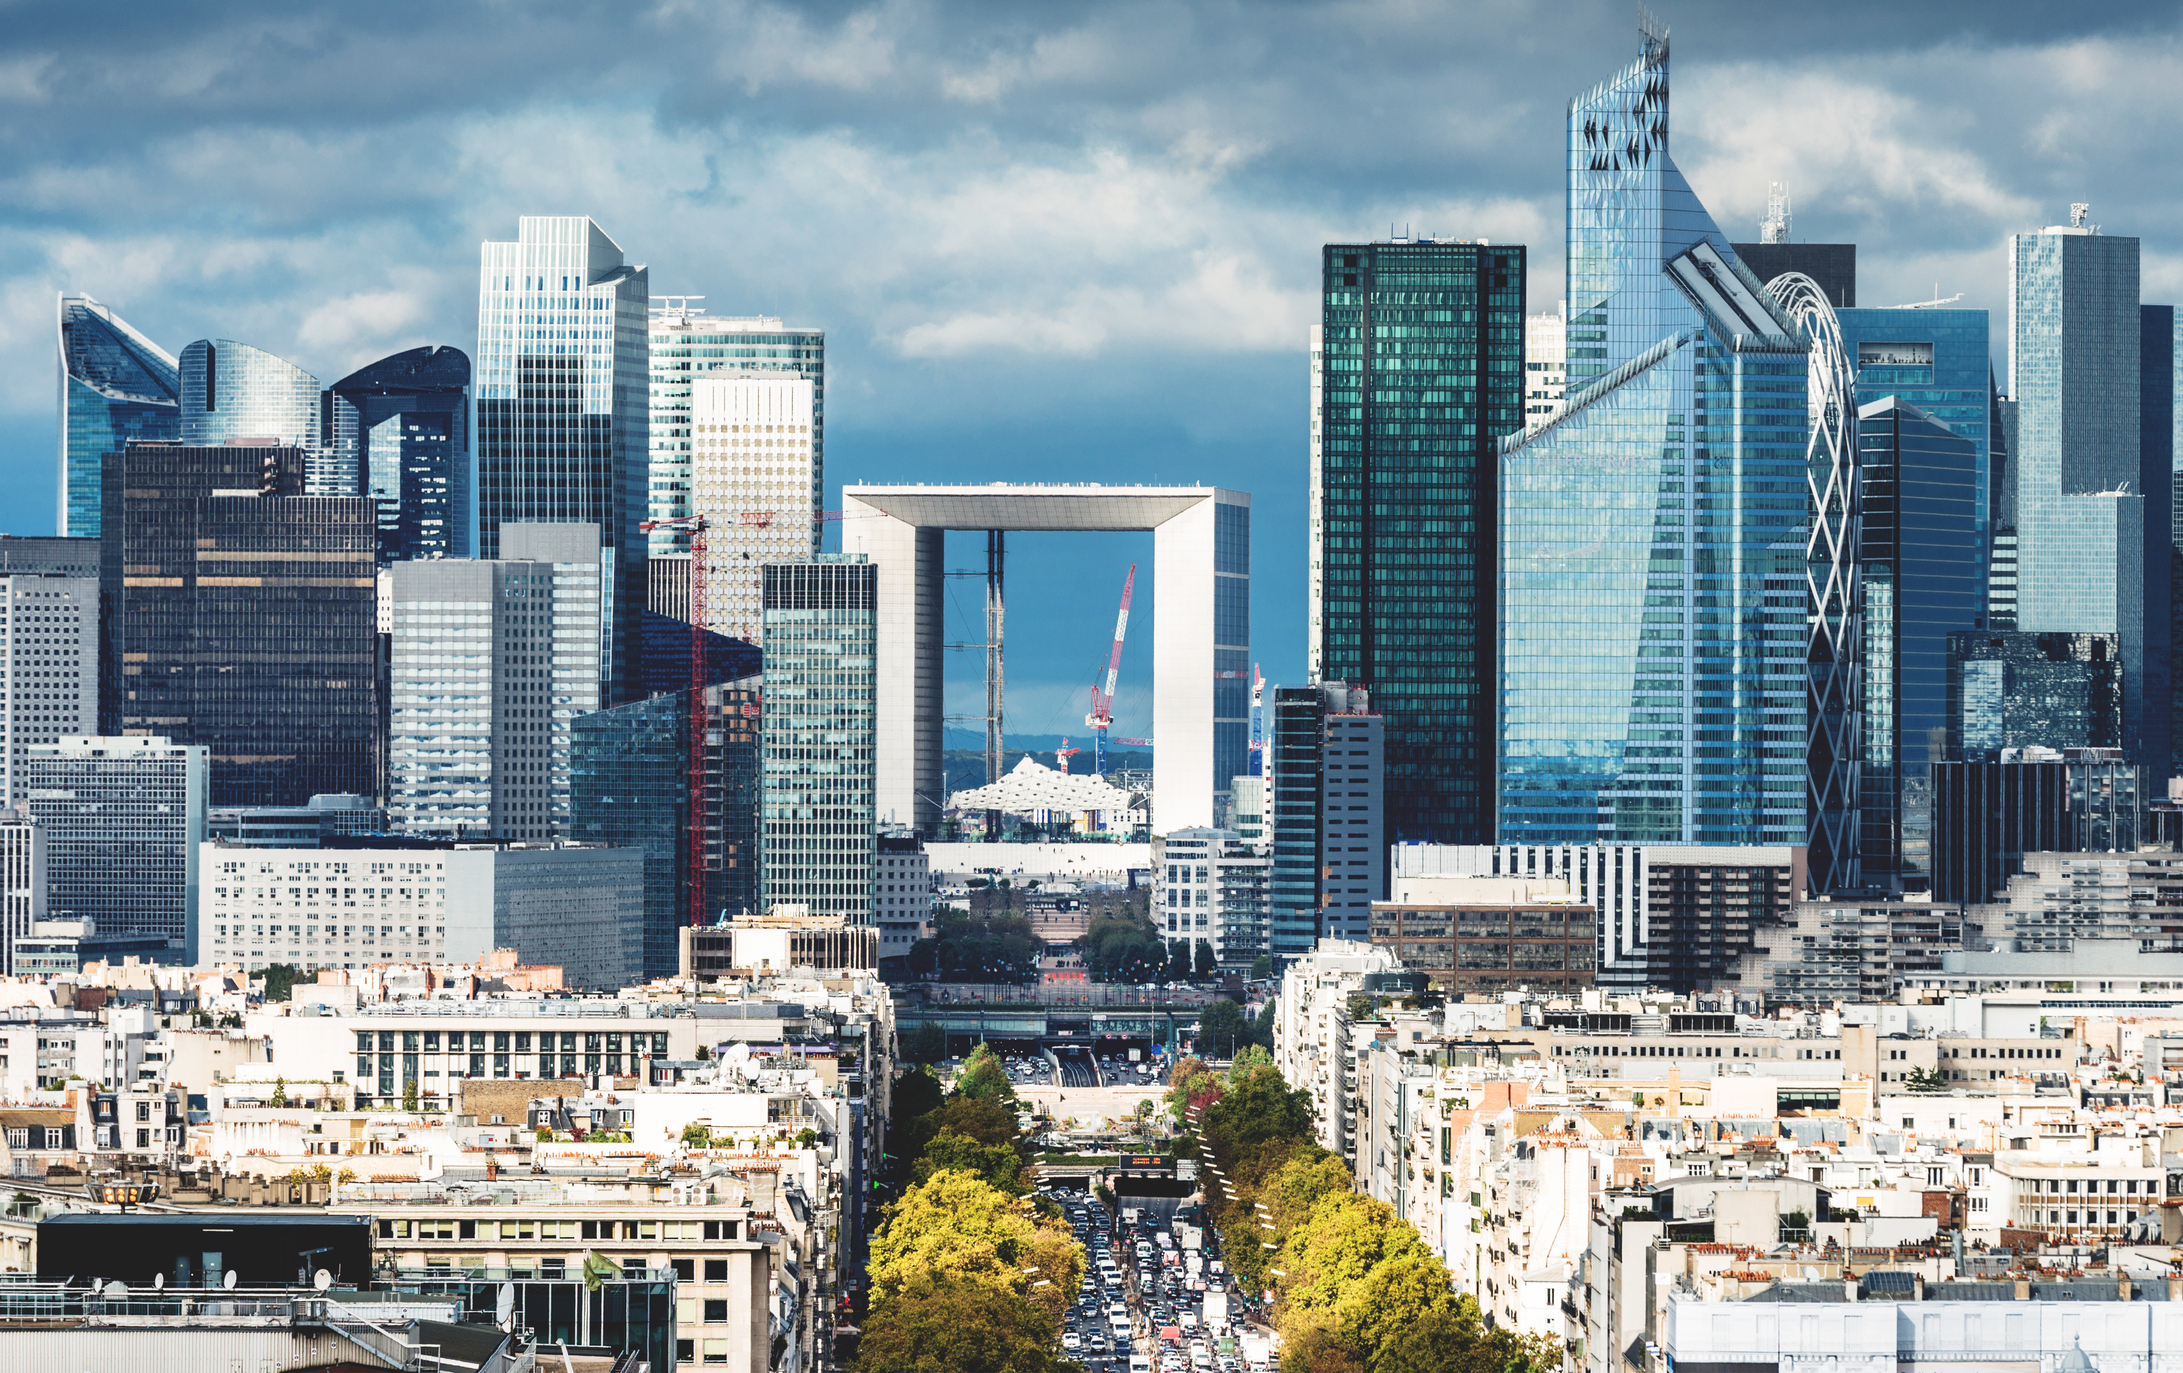 France Tourist offices of the future: the digital support of hosting